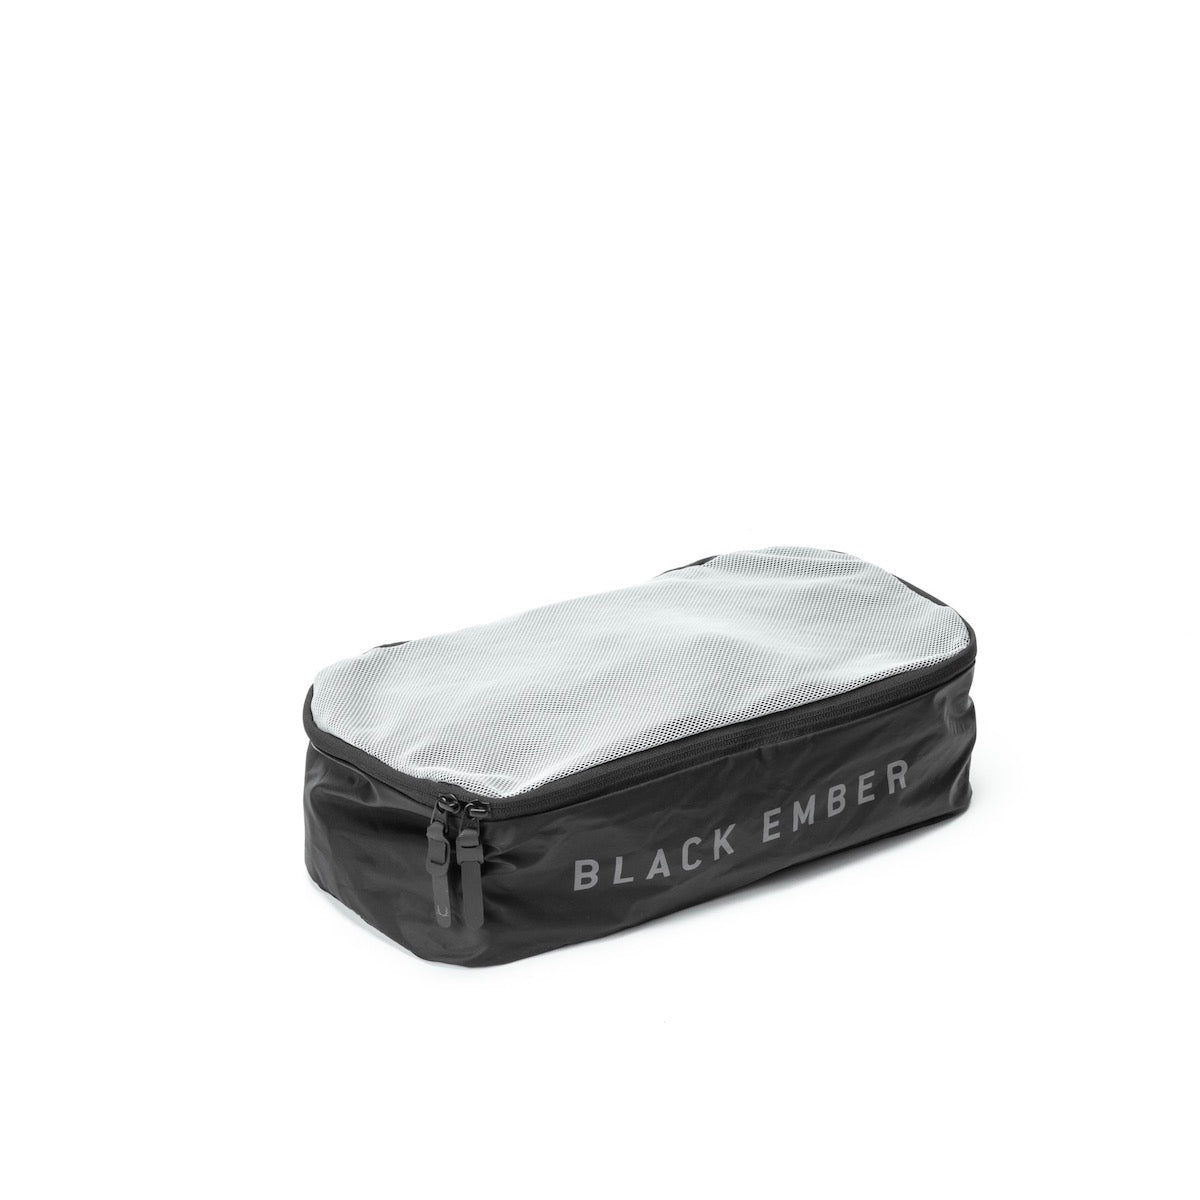 black-ember-packing-cube-small